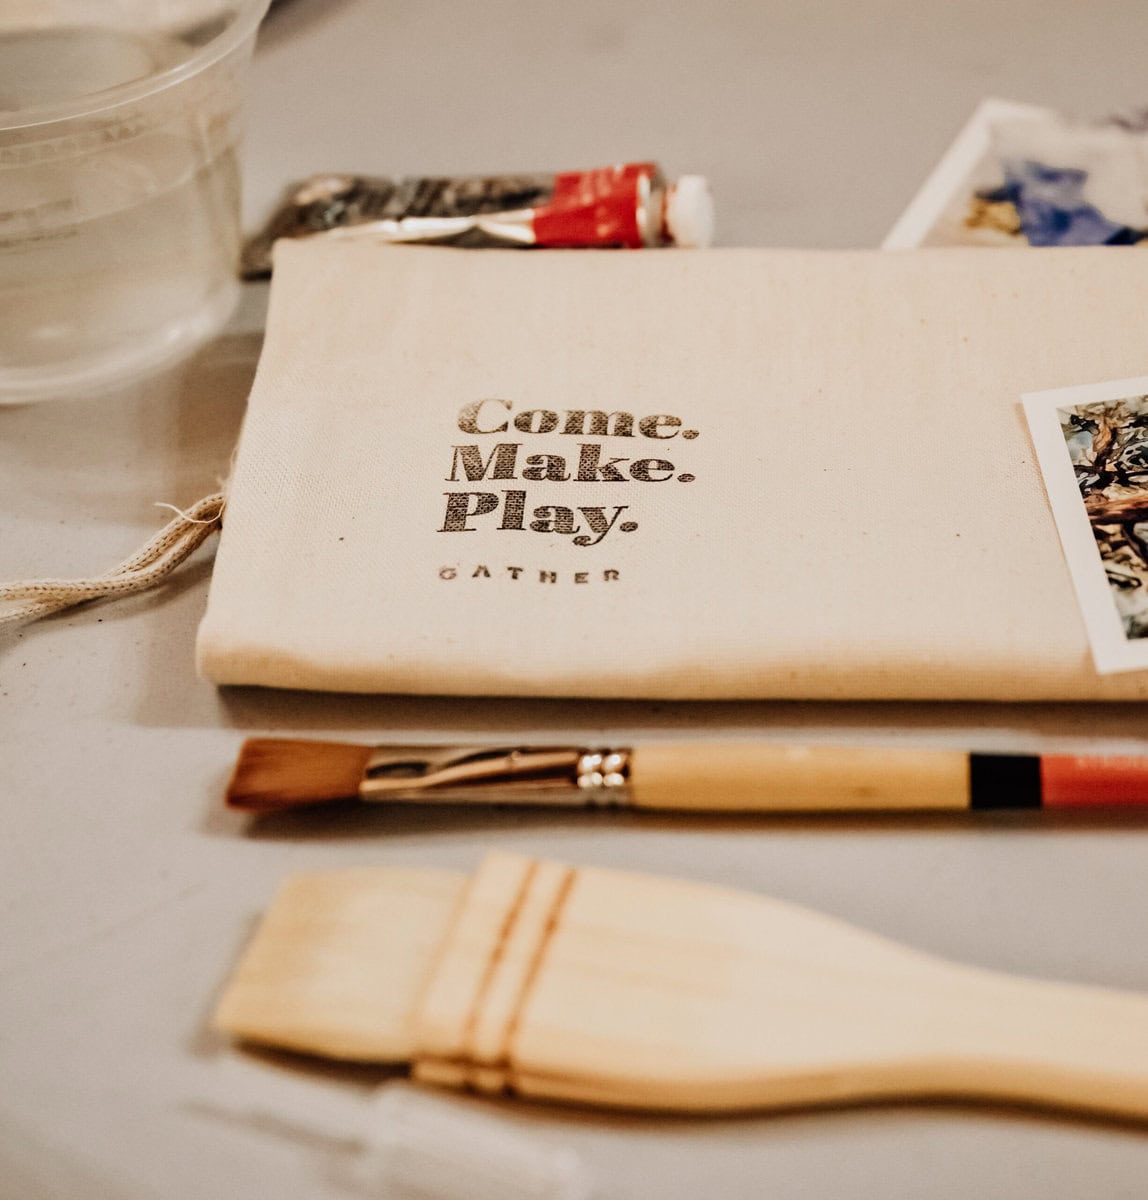 Art supplies including paint brushes and tubes on a table with a notebook that reads "come. make. play. gather.